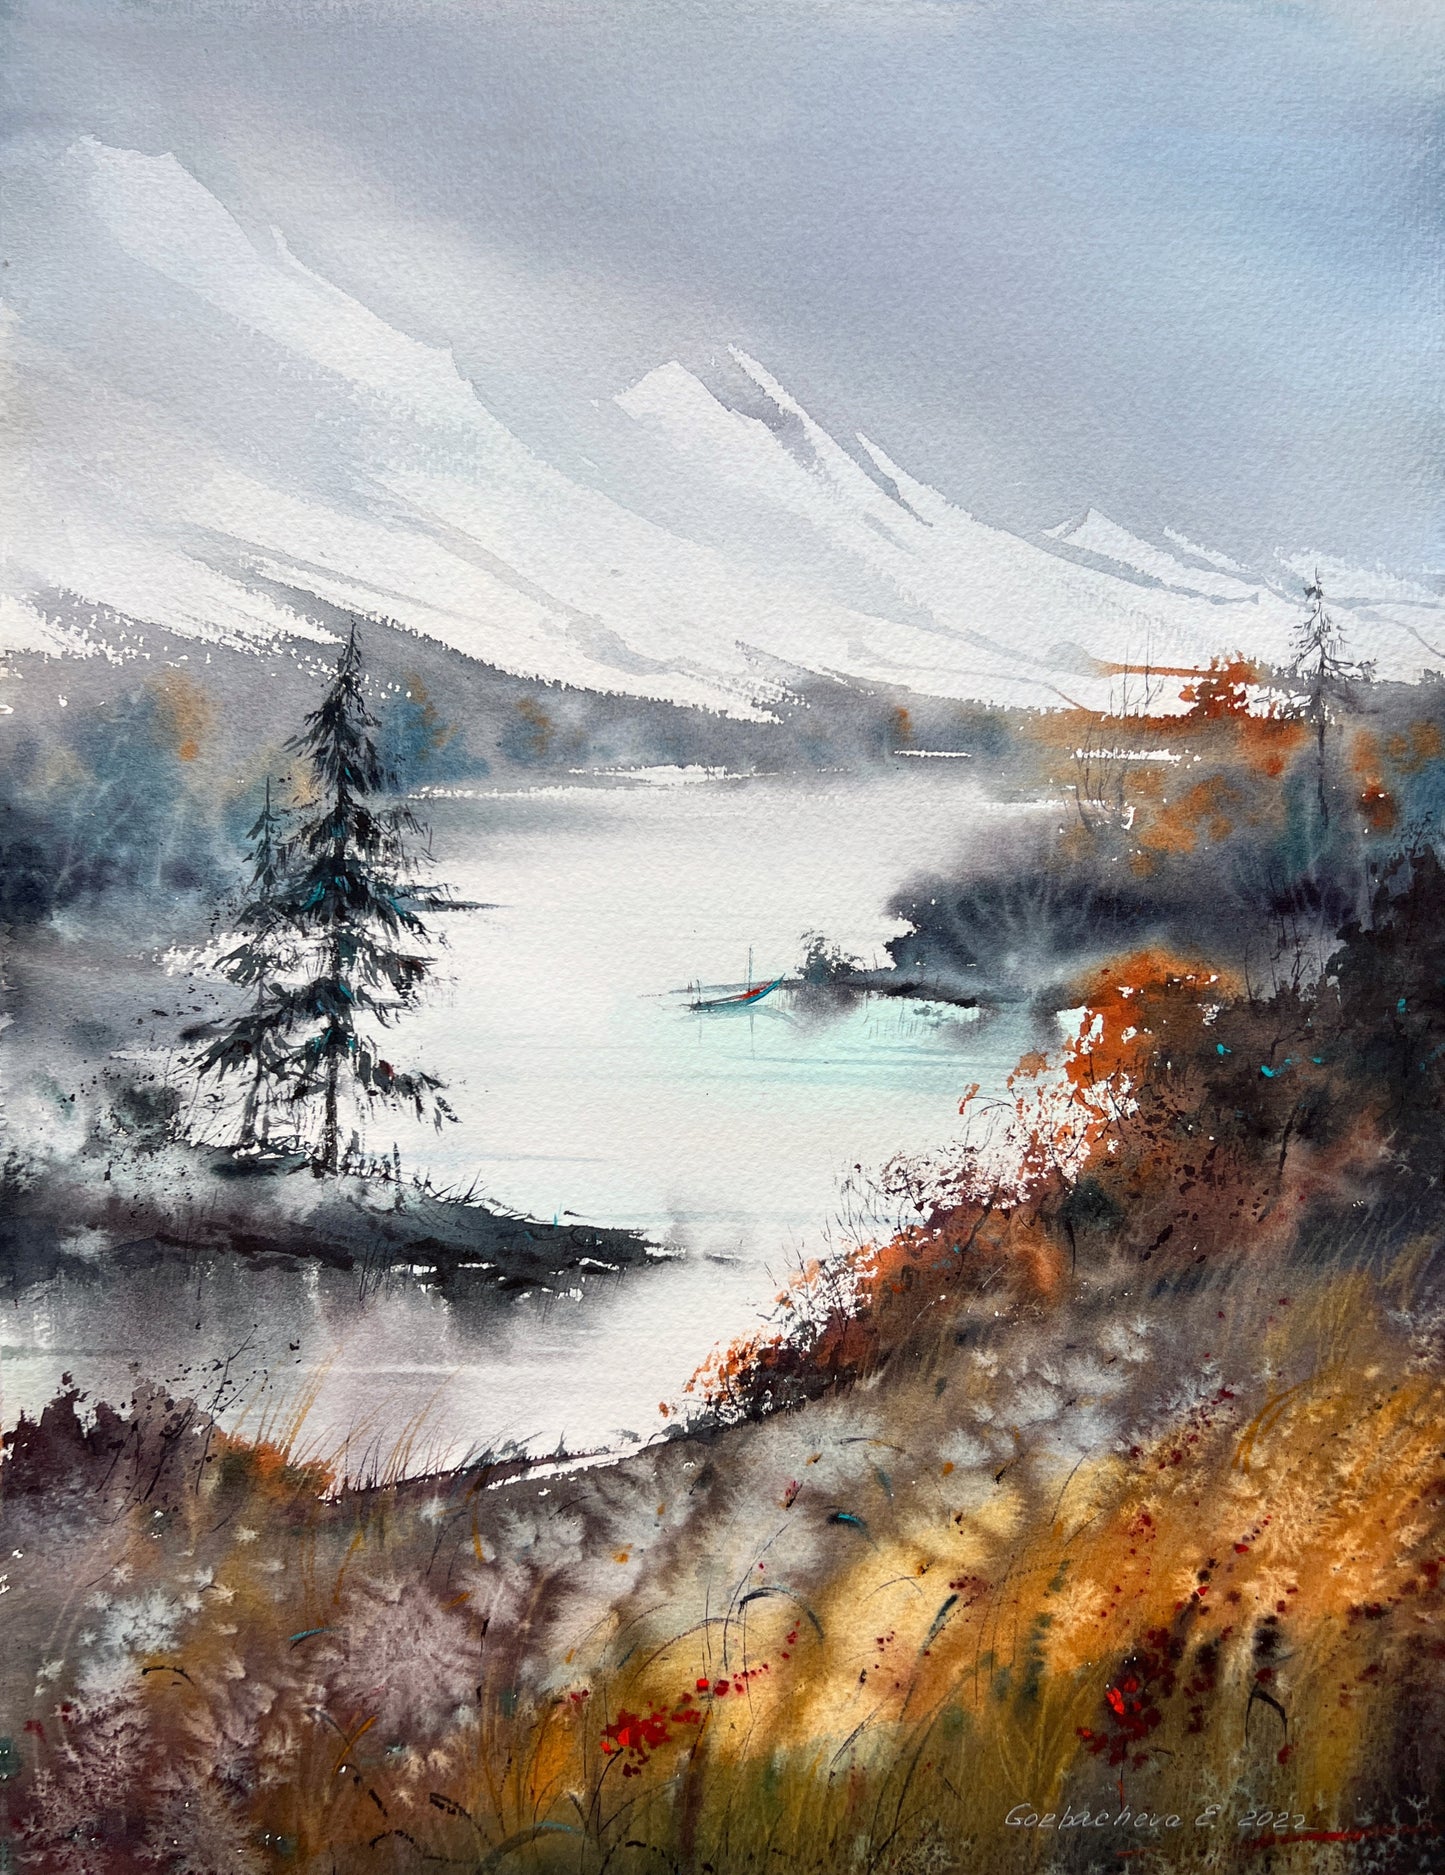 Mountain River #41: Autumn Landscape Watercolor Painting, 15x19 in